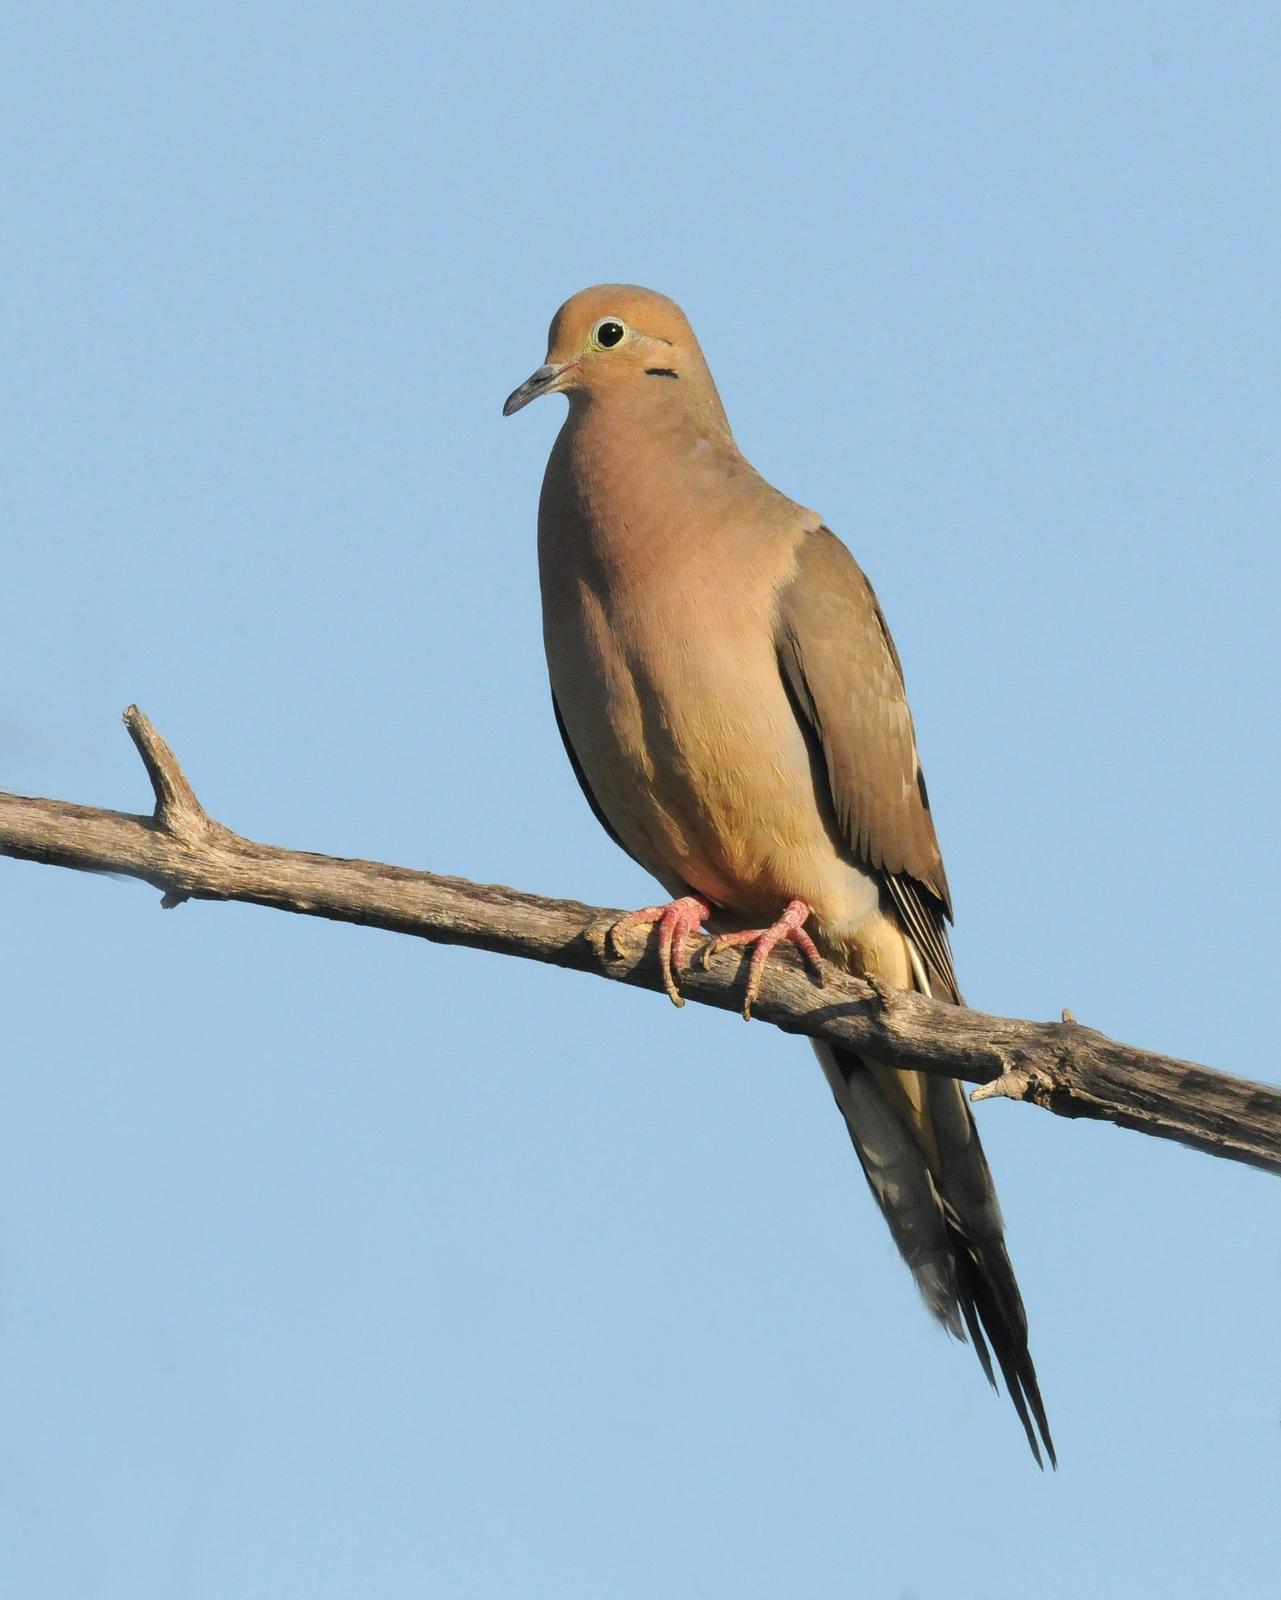 Mourning Dove Photo by Steven Mlodinow